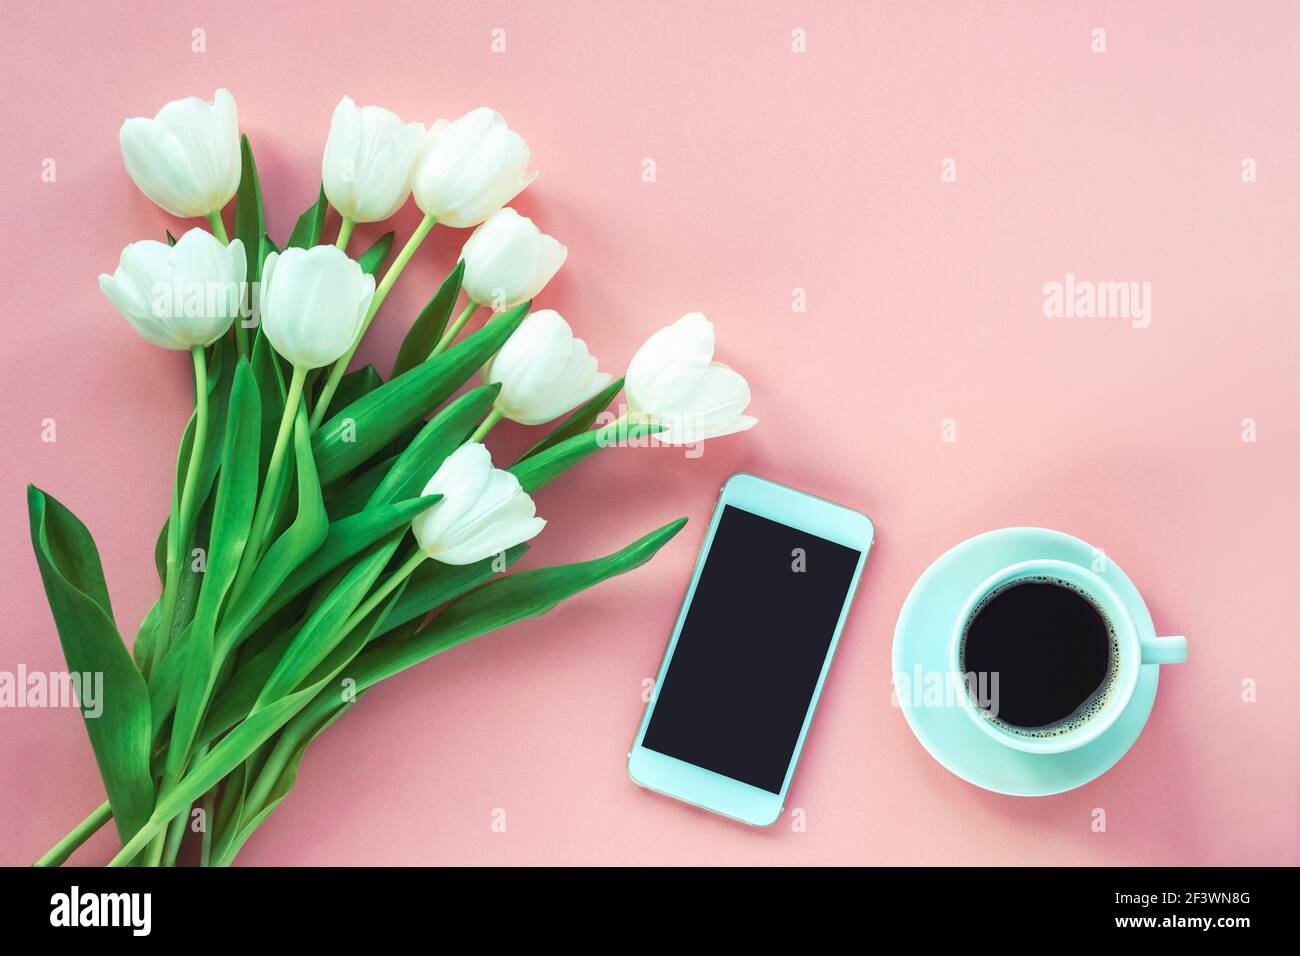 Cup of coffee, smartphone and white tulips on pink background, top view. Women's day or Mother's day concept. Flat lay, copy space. Stock Photo